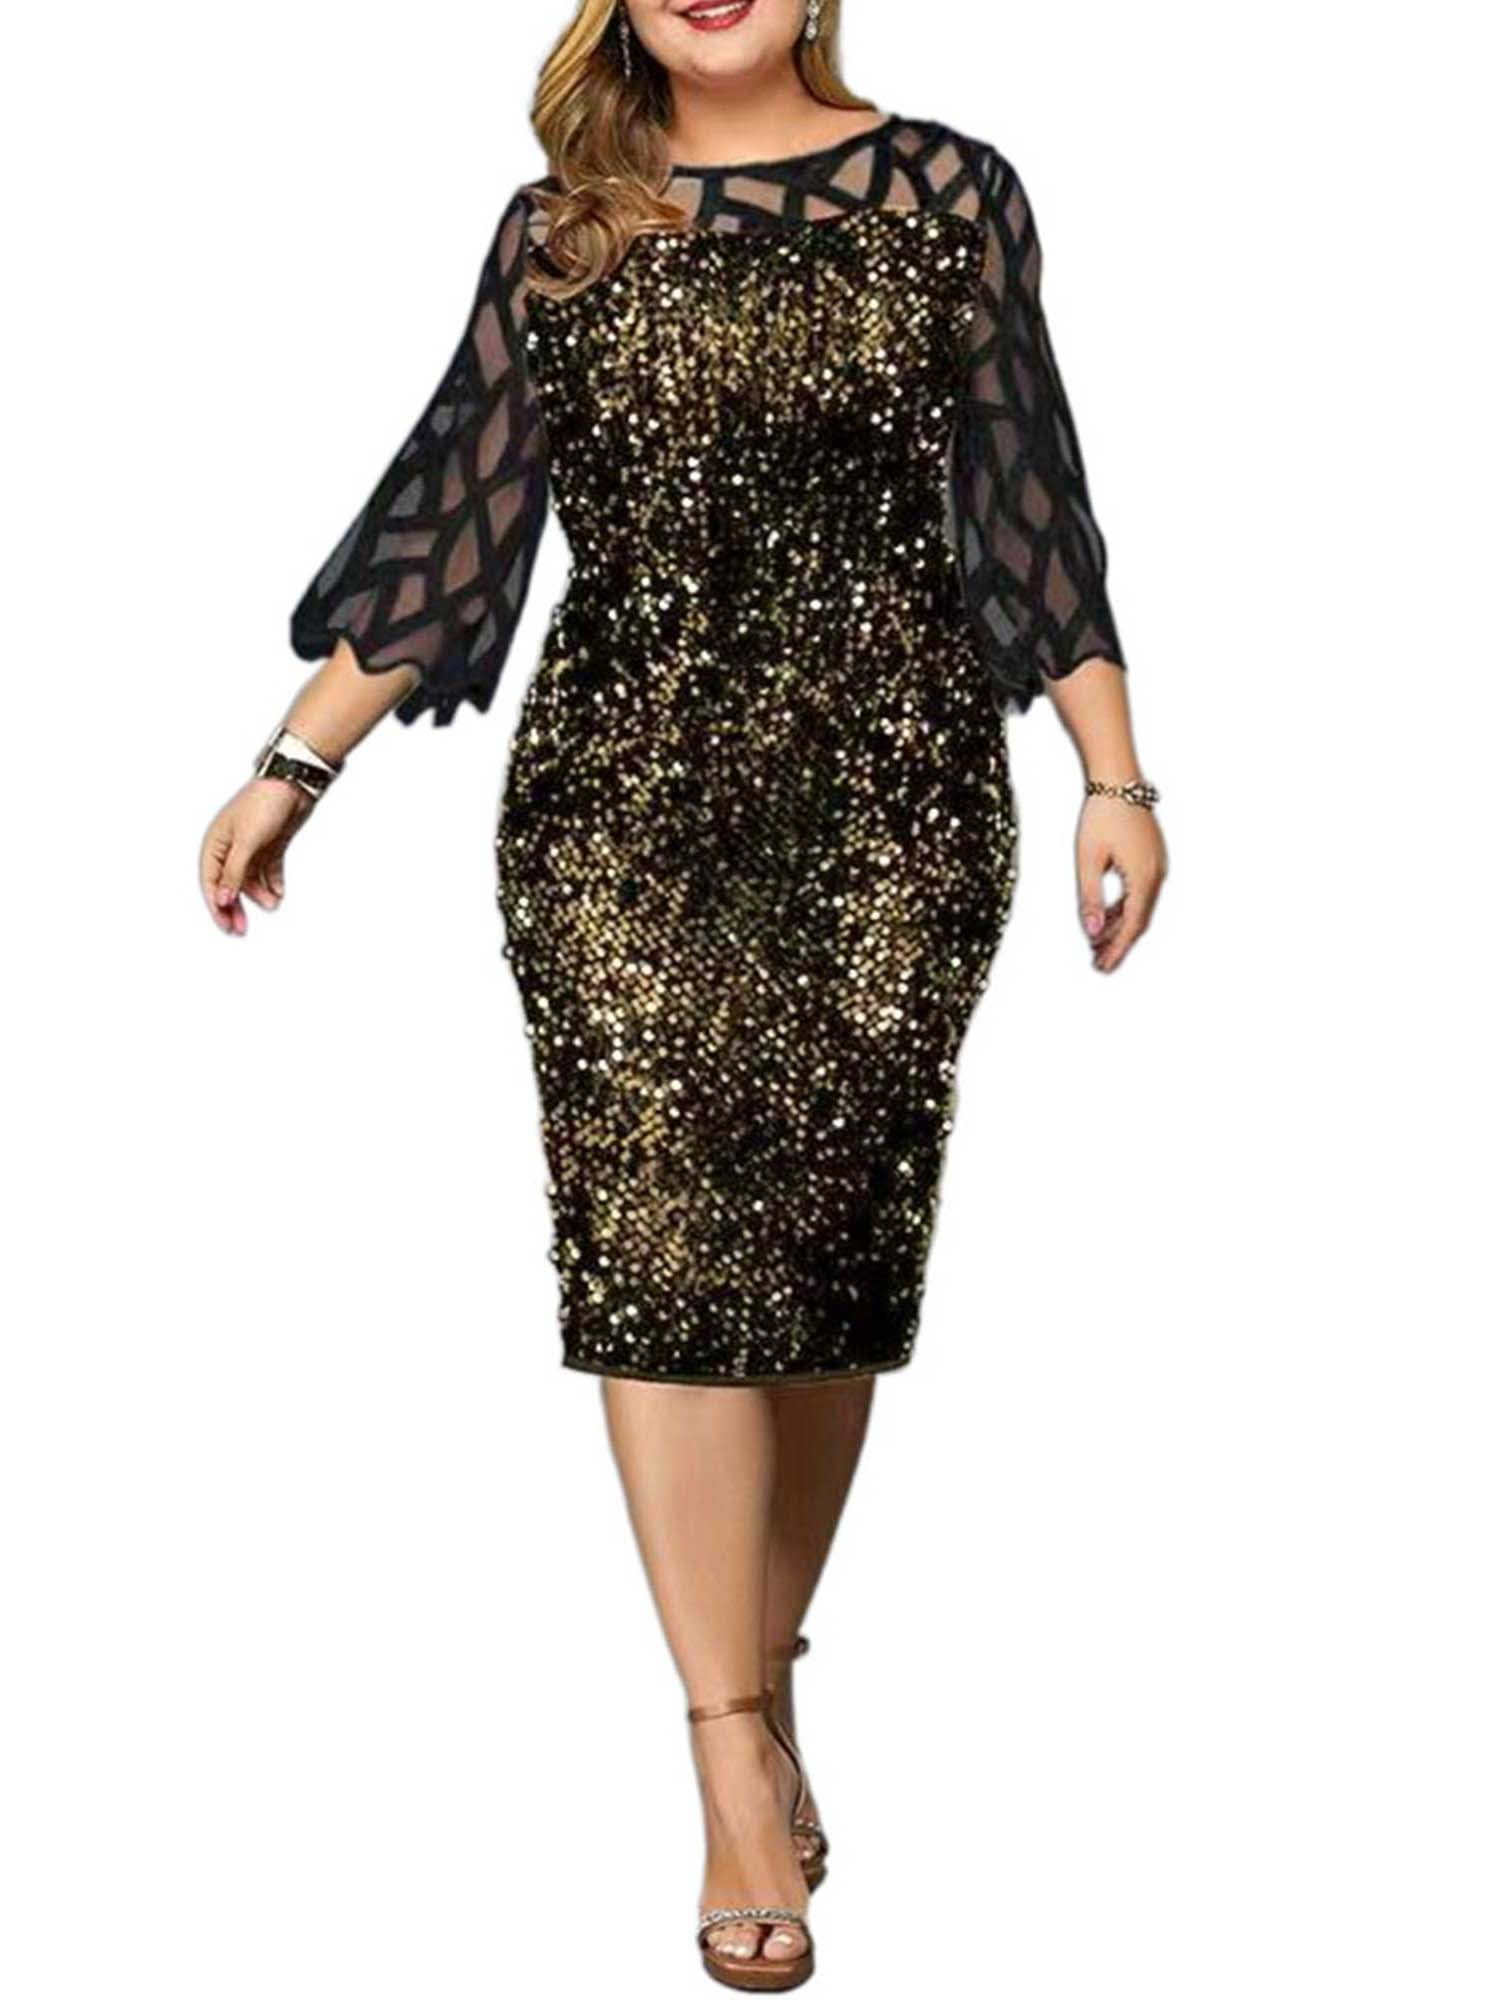 Enwejyy Women Party Cocktail Formal Dress Ball Gown Sequins Half Sleeve ...